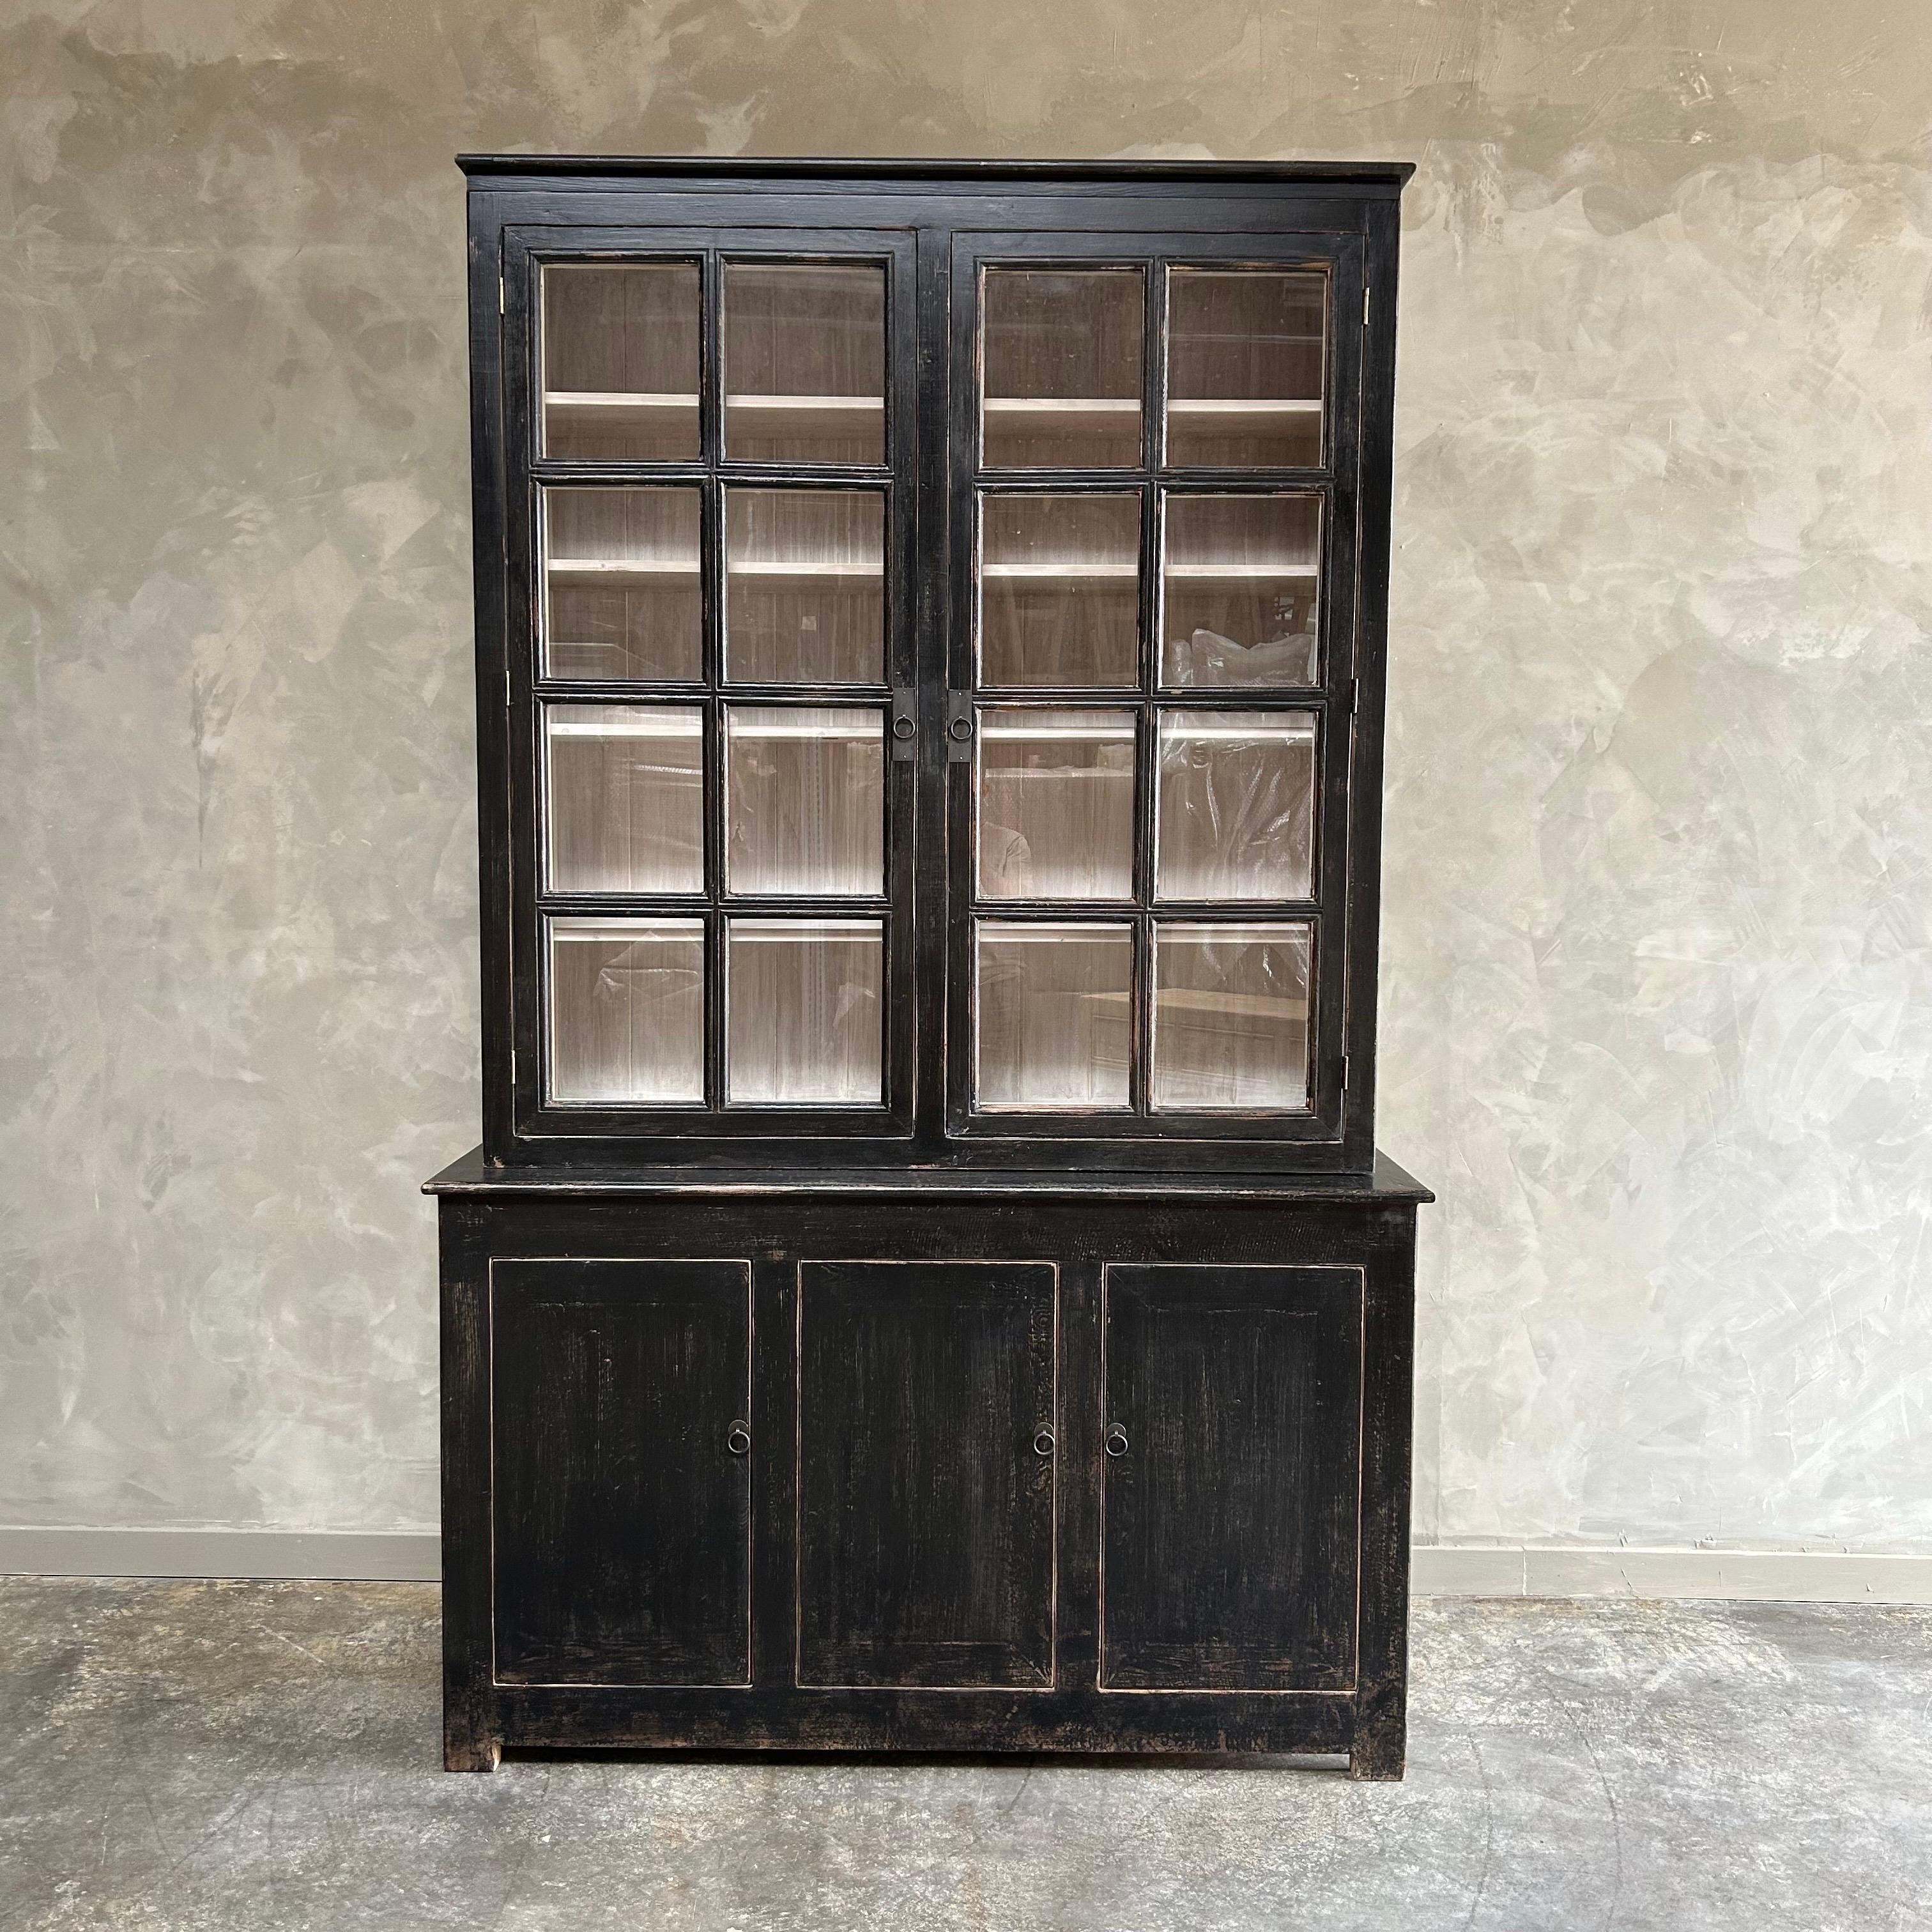 The  Cabinet is a reclaimed wood cabinet that is beautifully crafted and the perfect storage solution. 
Finish: Weathered Black
Dimensions: 60″W x 18″D x 96″H
custom sizes available by order only
Since this is made from vintage material, there may